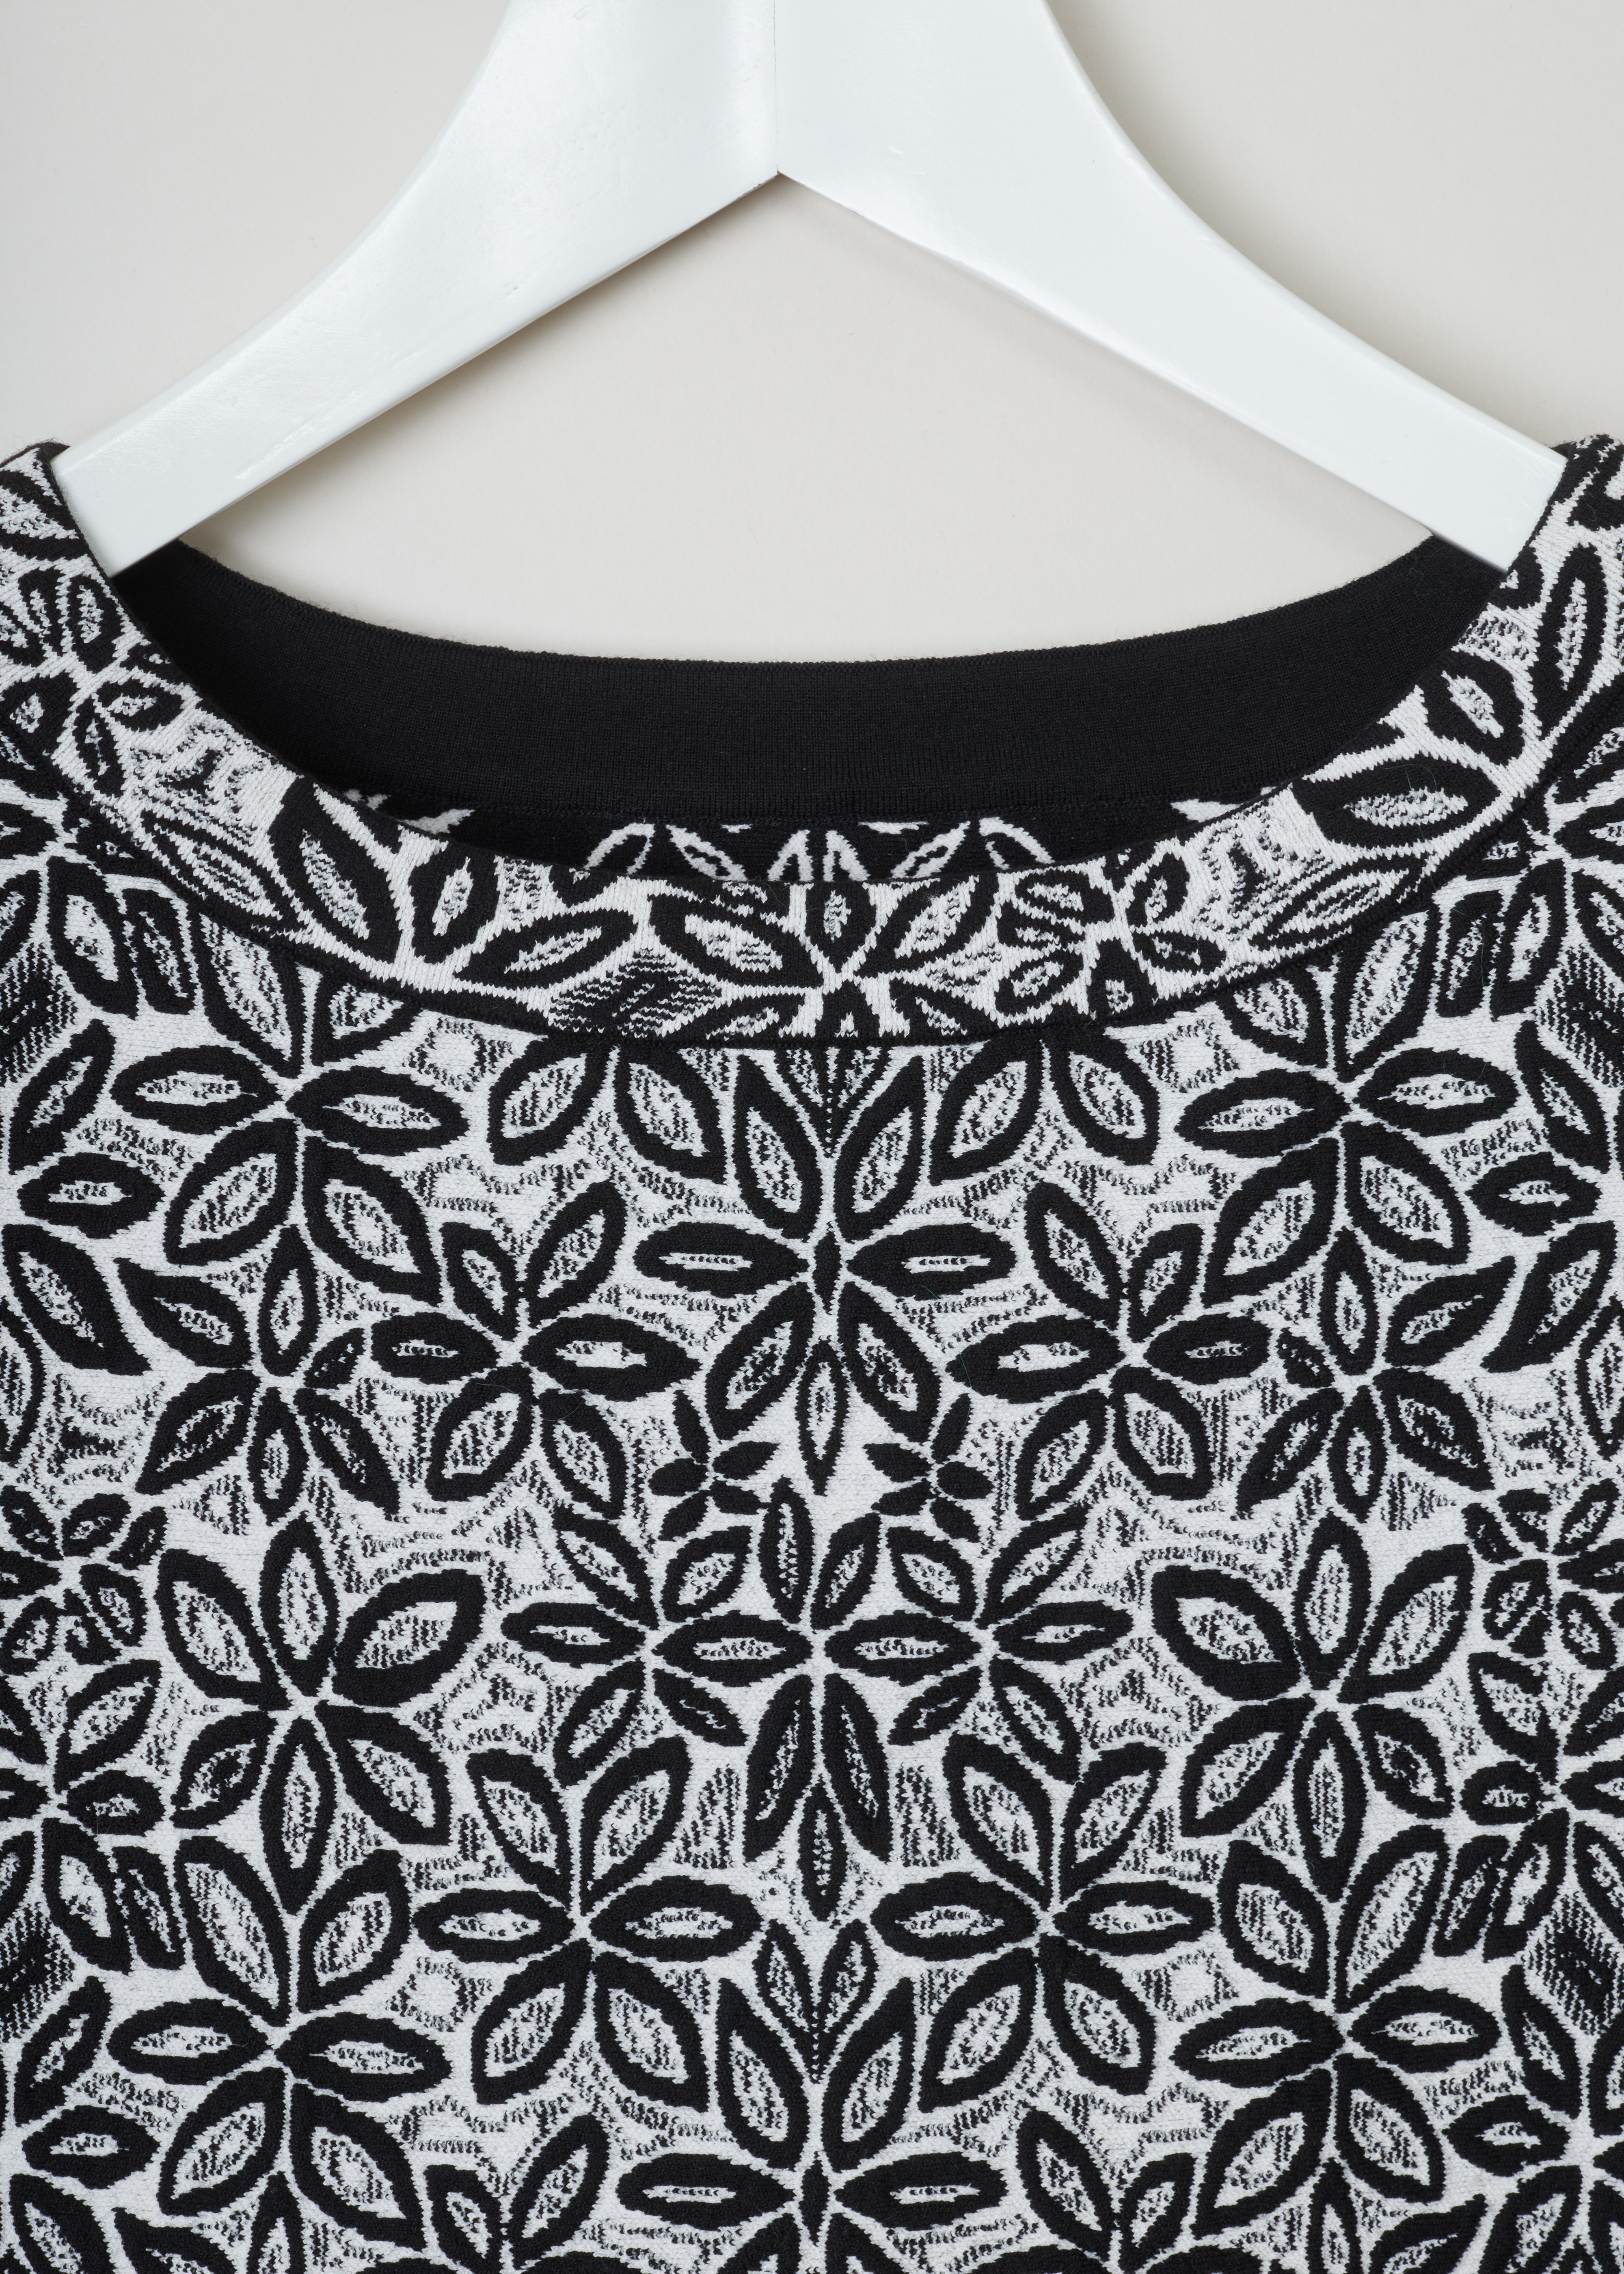 Alaïa, Wool-blend tunic with a flower pattern, 7W9UE52RM353_TUNIQUE_ADENIUM_C009_Blanc/Noir, Grey, Print, Detail, Jacquard knitted tunic with a black and white flower motif. The dress has short sleeves, a wide round neckline, an A-line silhouette and scalloped hems.

